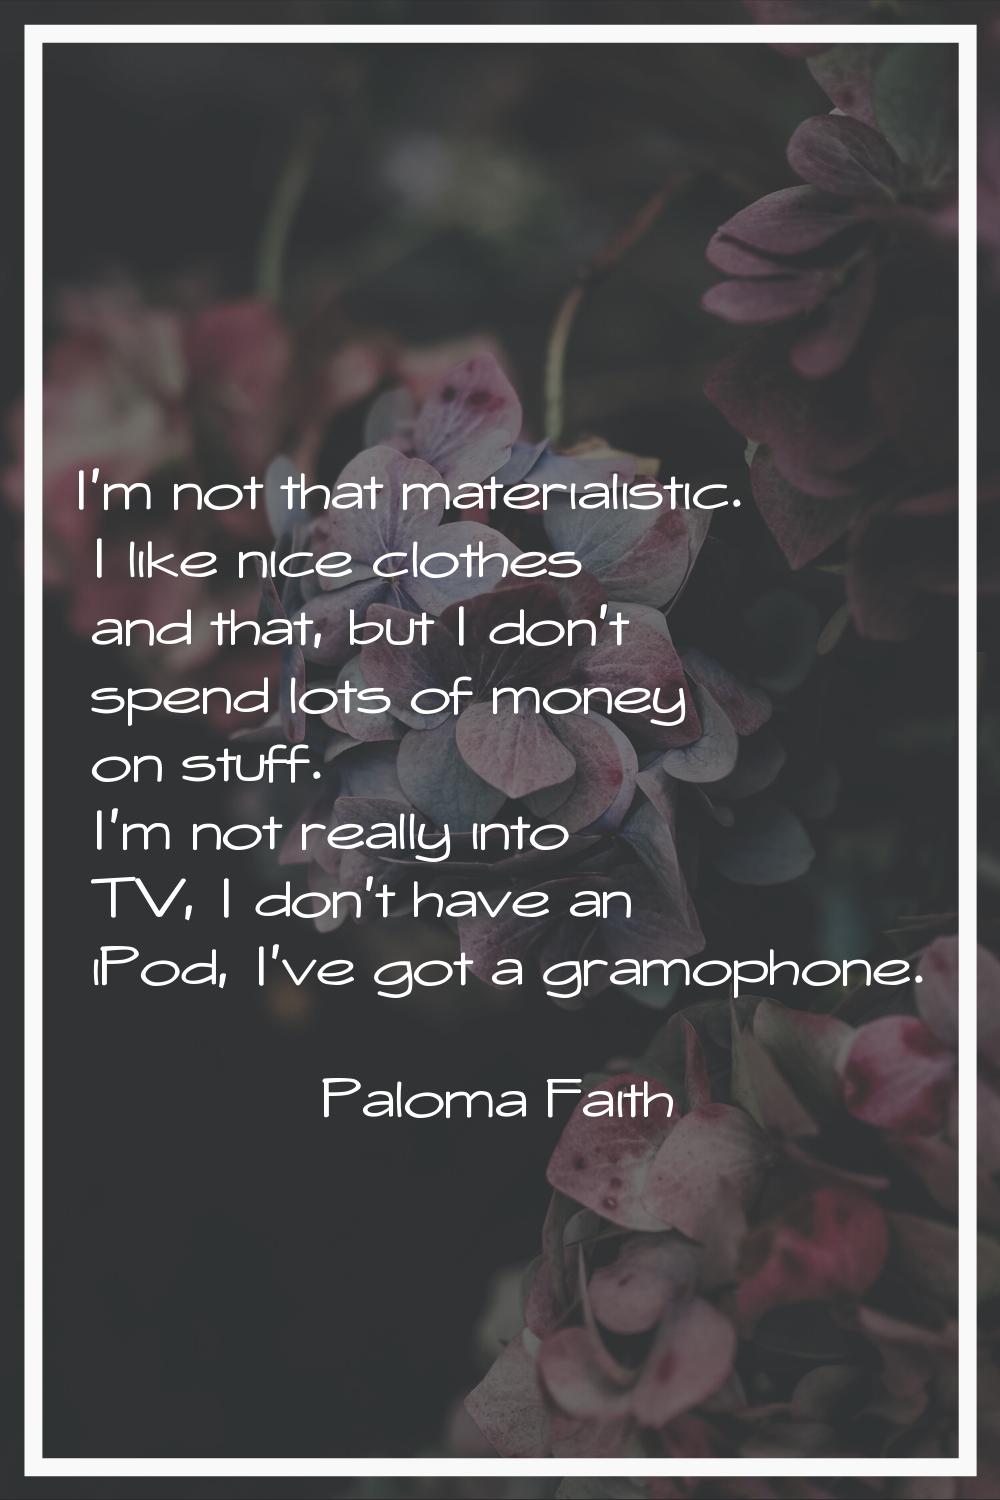 I'm not that materialistic. I like nice clothes and that, but I don't spend lots of money on stuff.